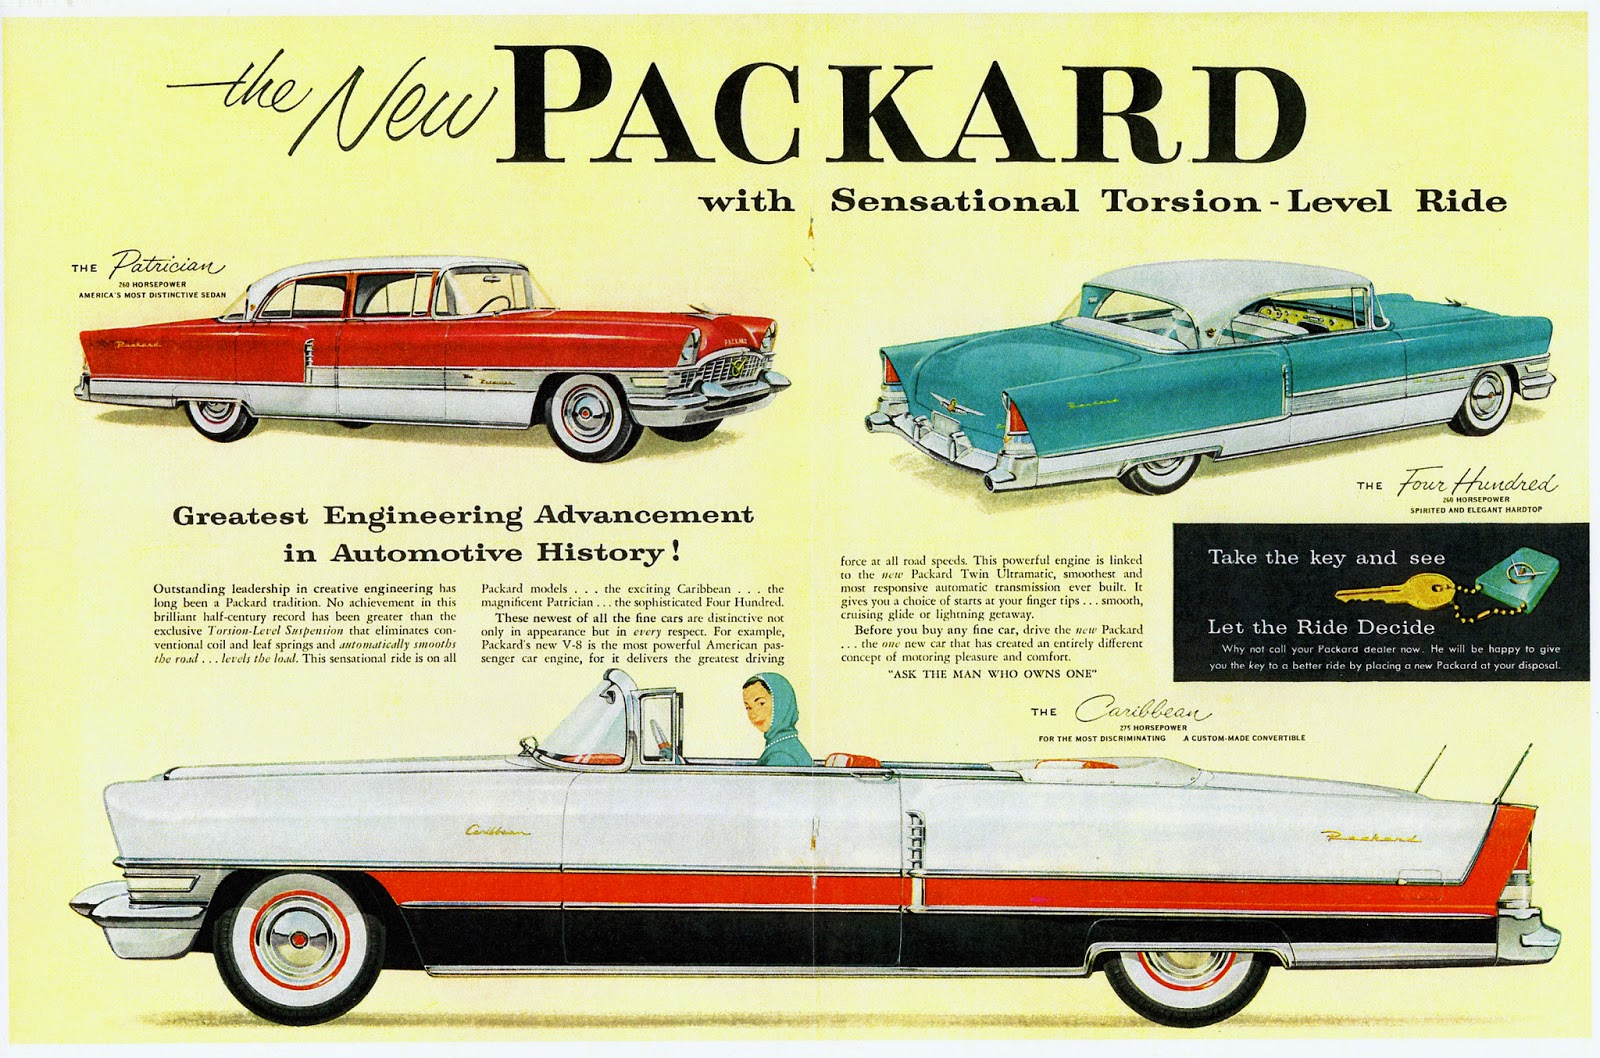 Collector Car Corner - The demise of the Studebaker-Packard Corporation